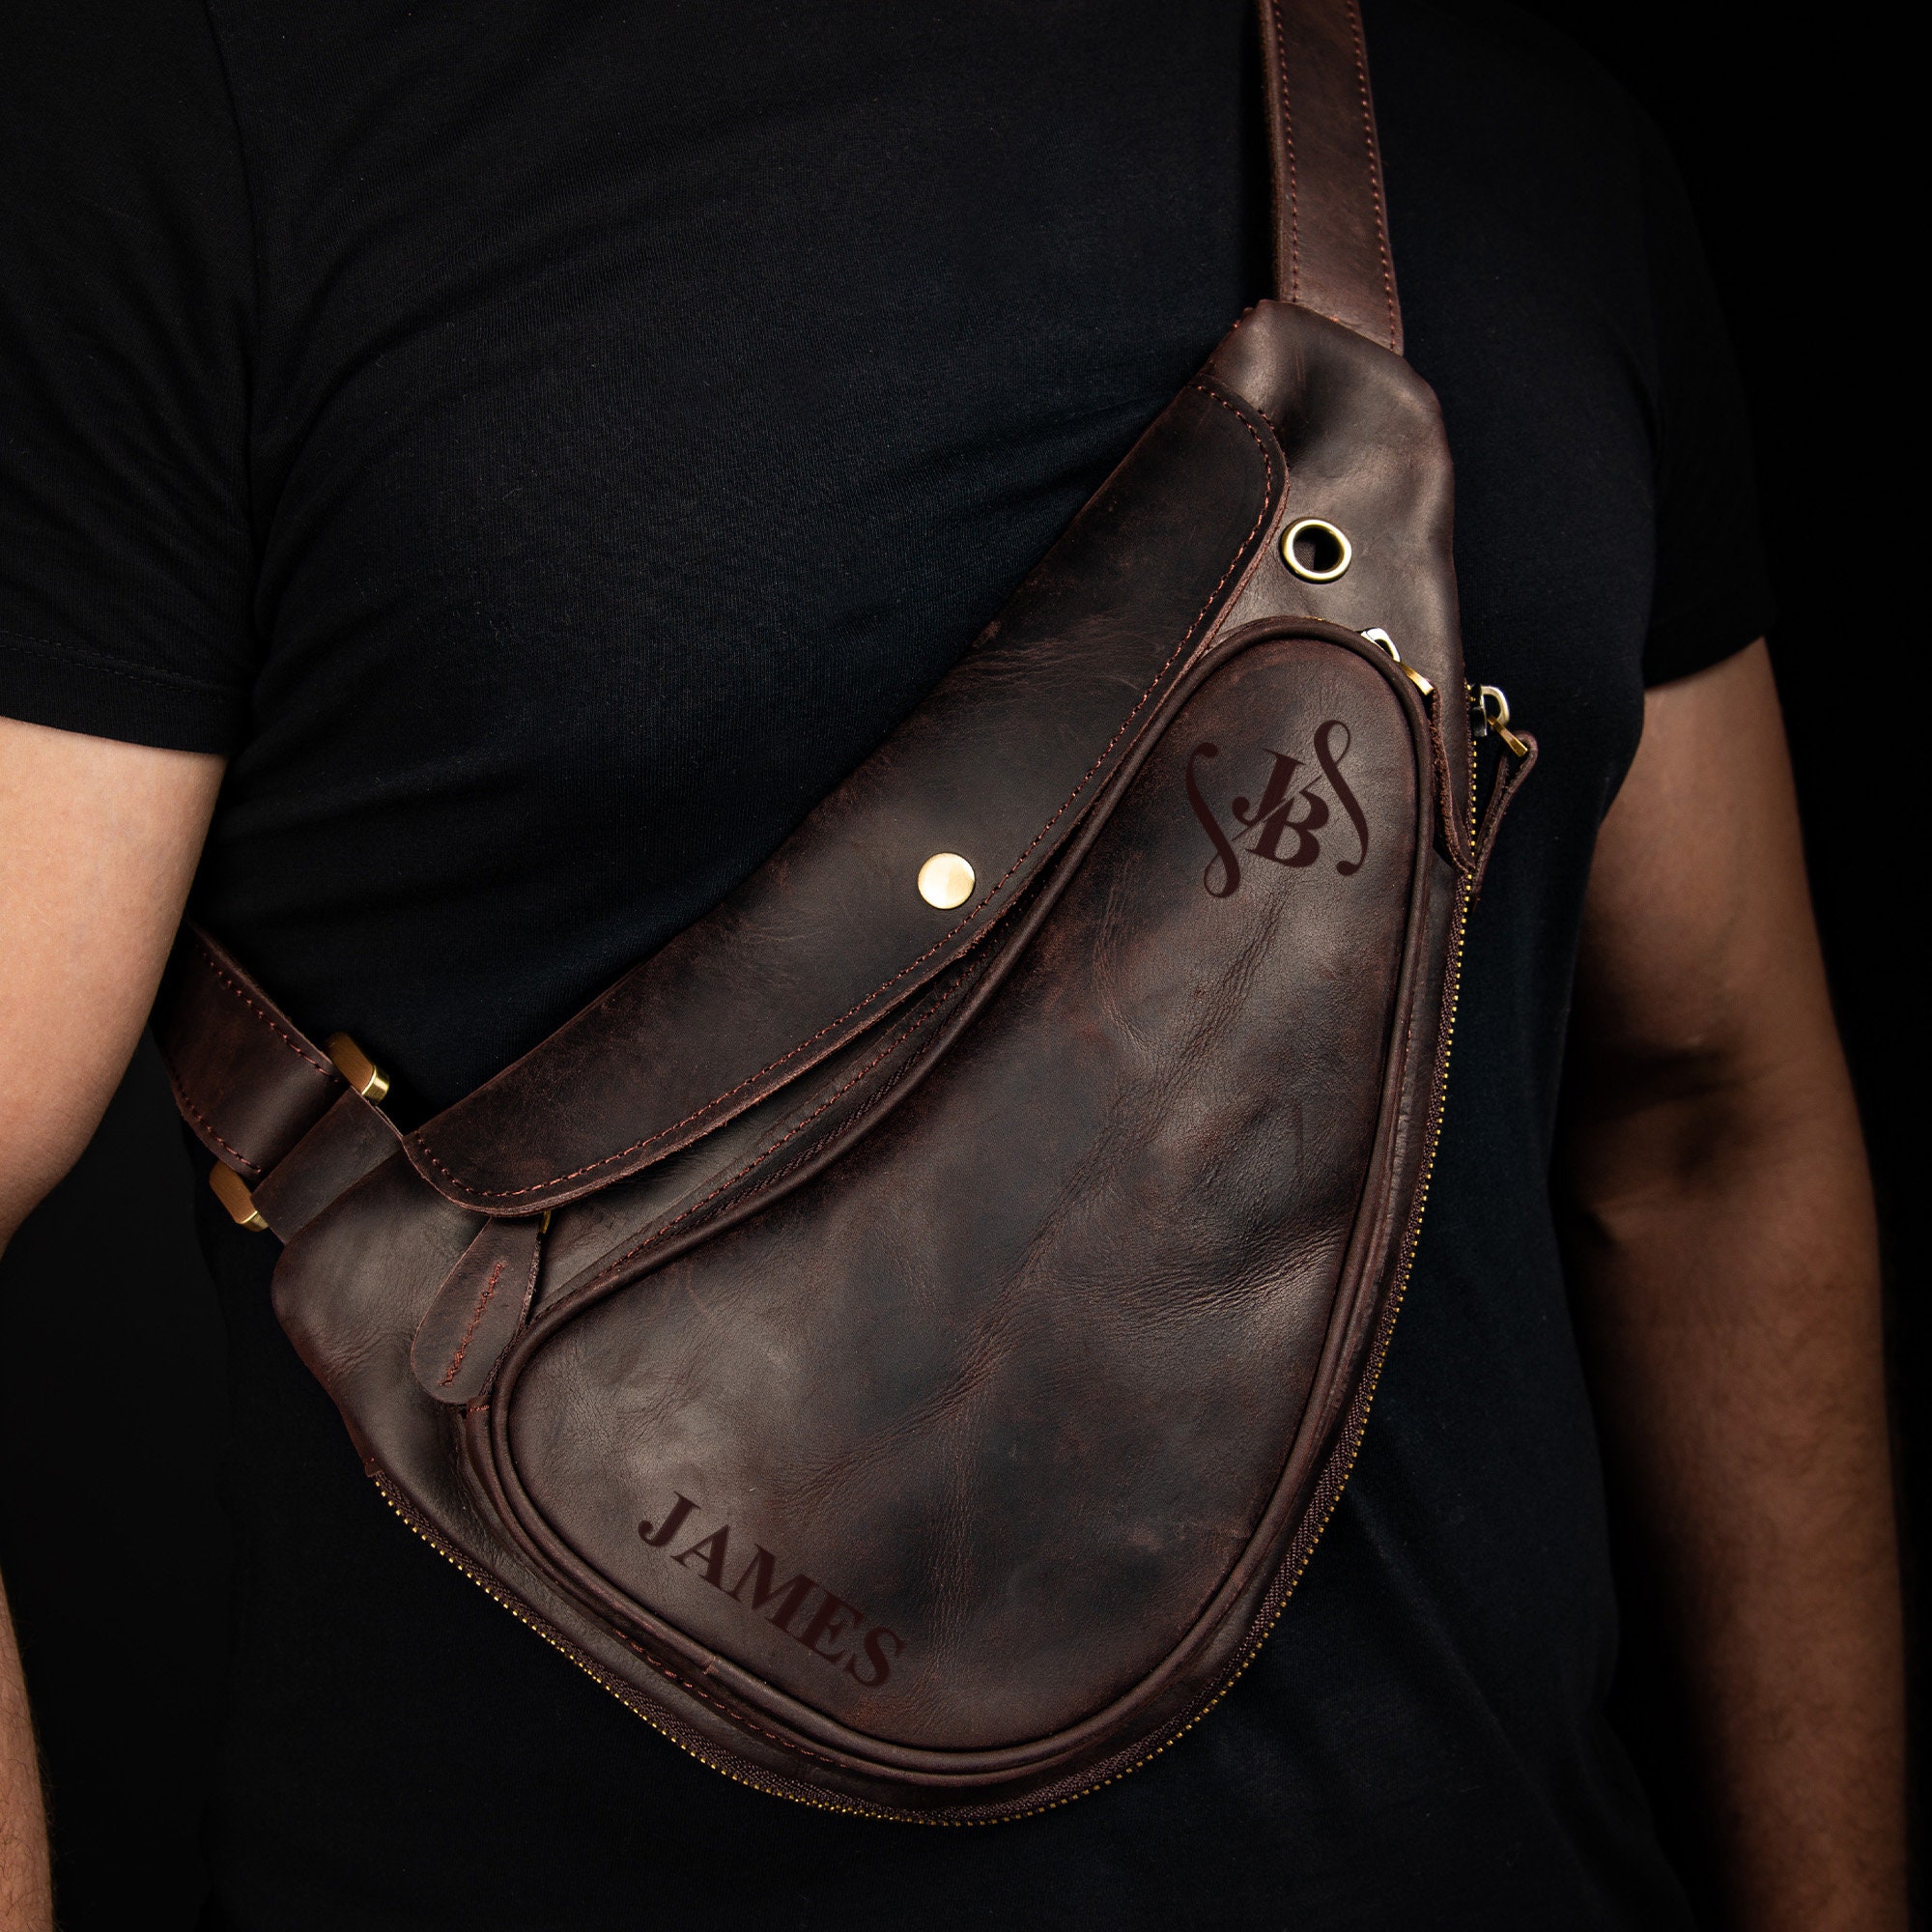 Custom Leather Sling Bag with Artwork / Logo of your choice. The